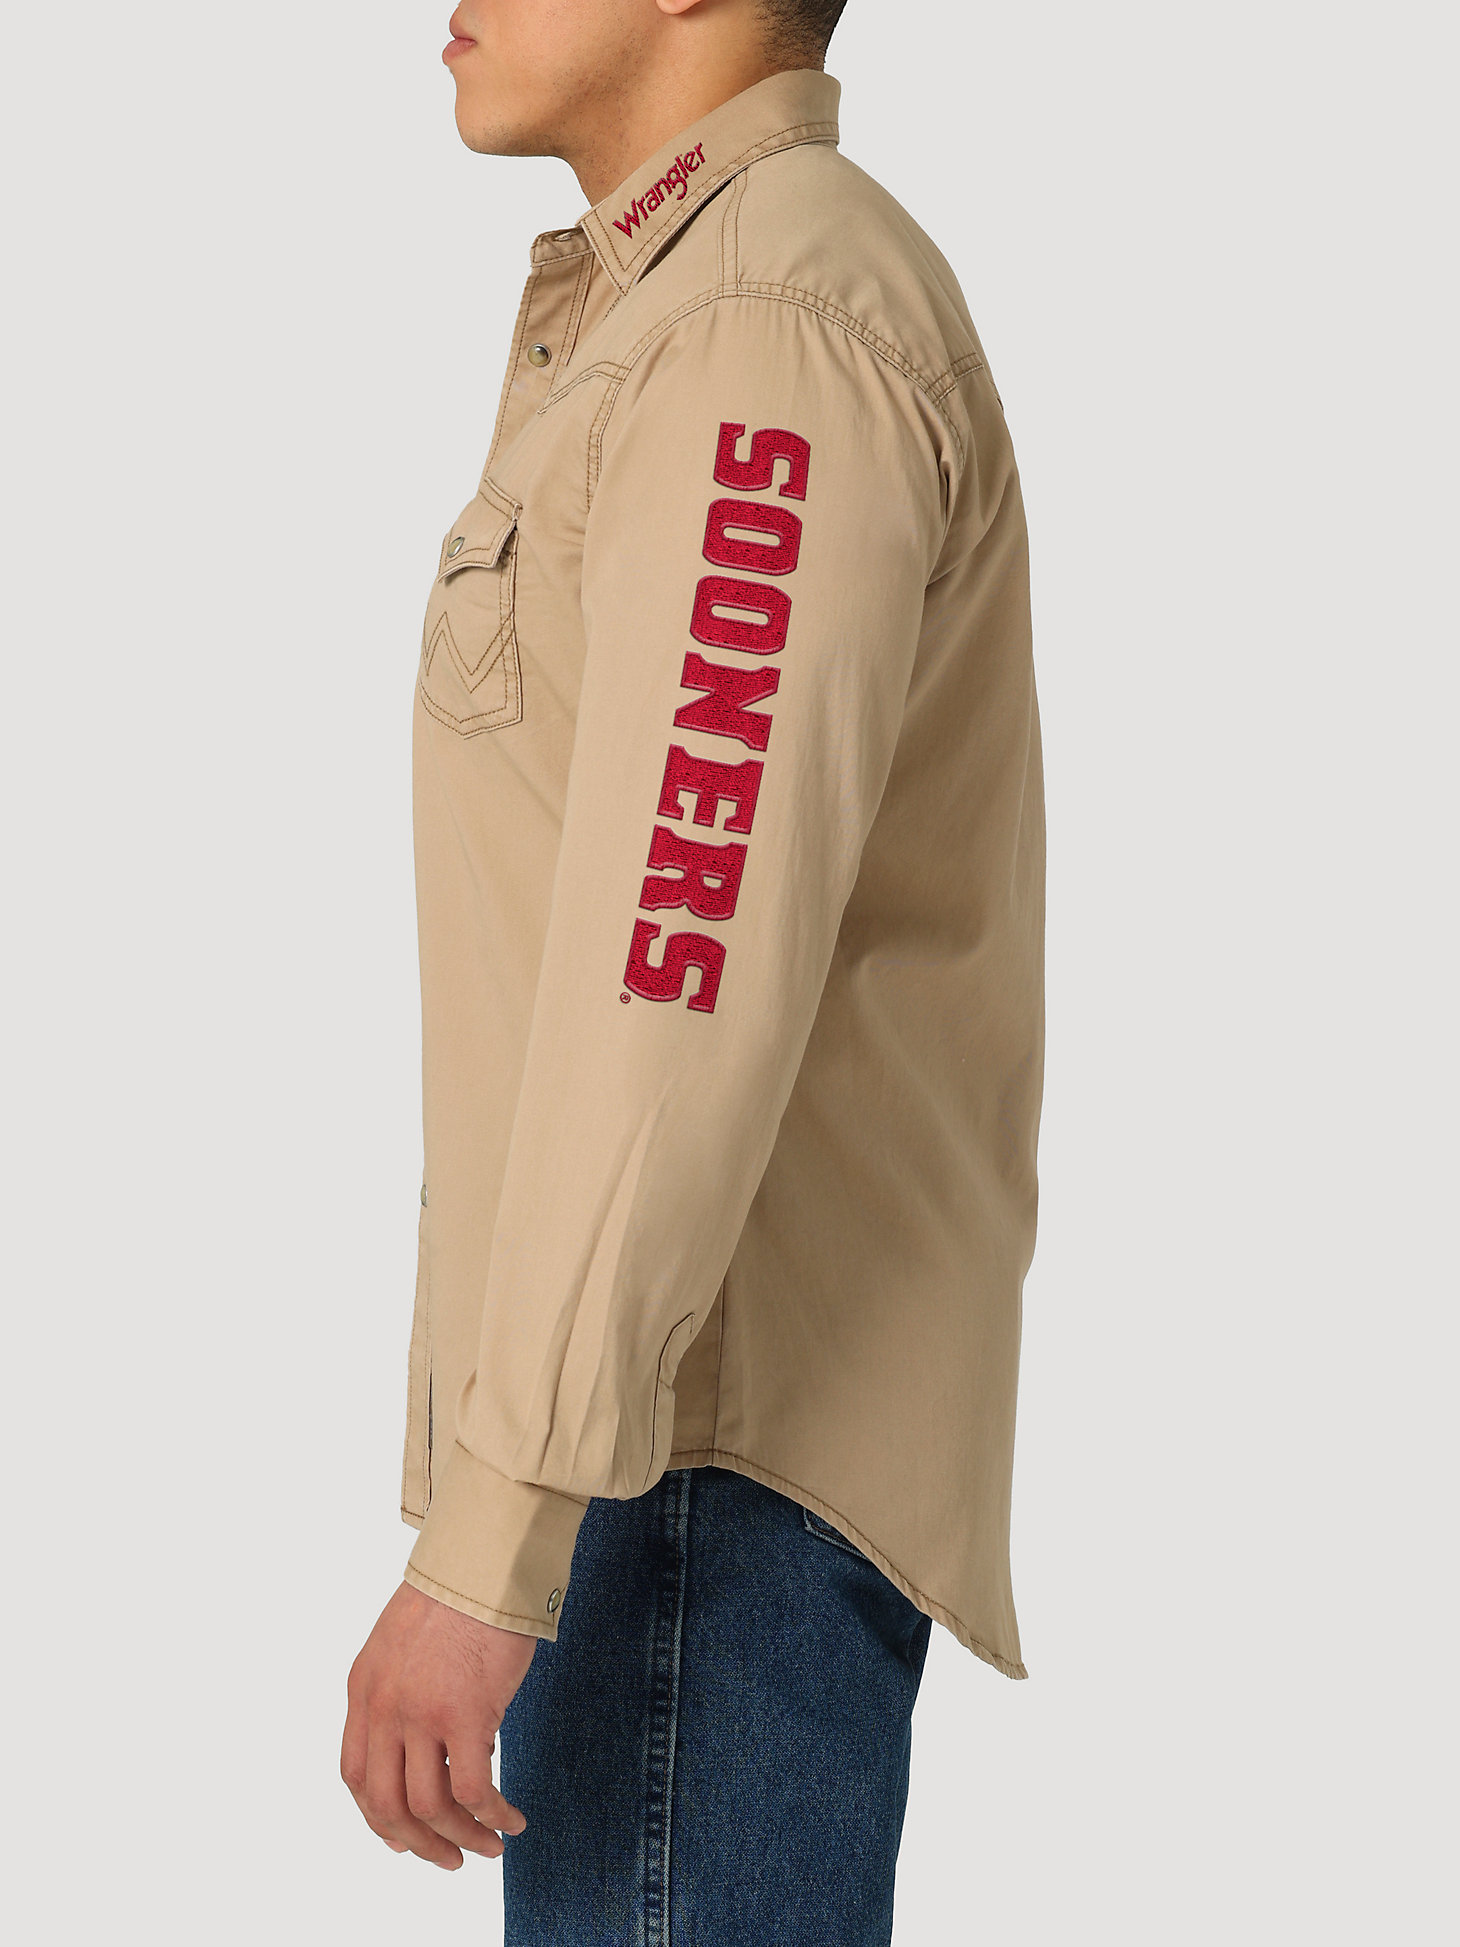 Wrangler Collegiate Embroidered Twill Western Snap Shirt in University of Oklahoma alternative view 2